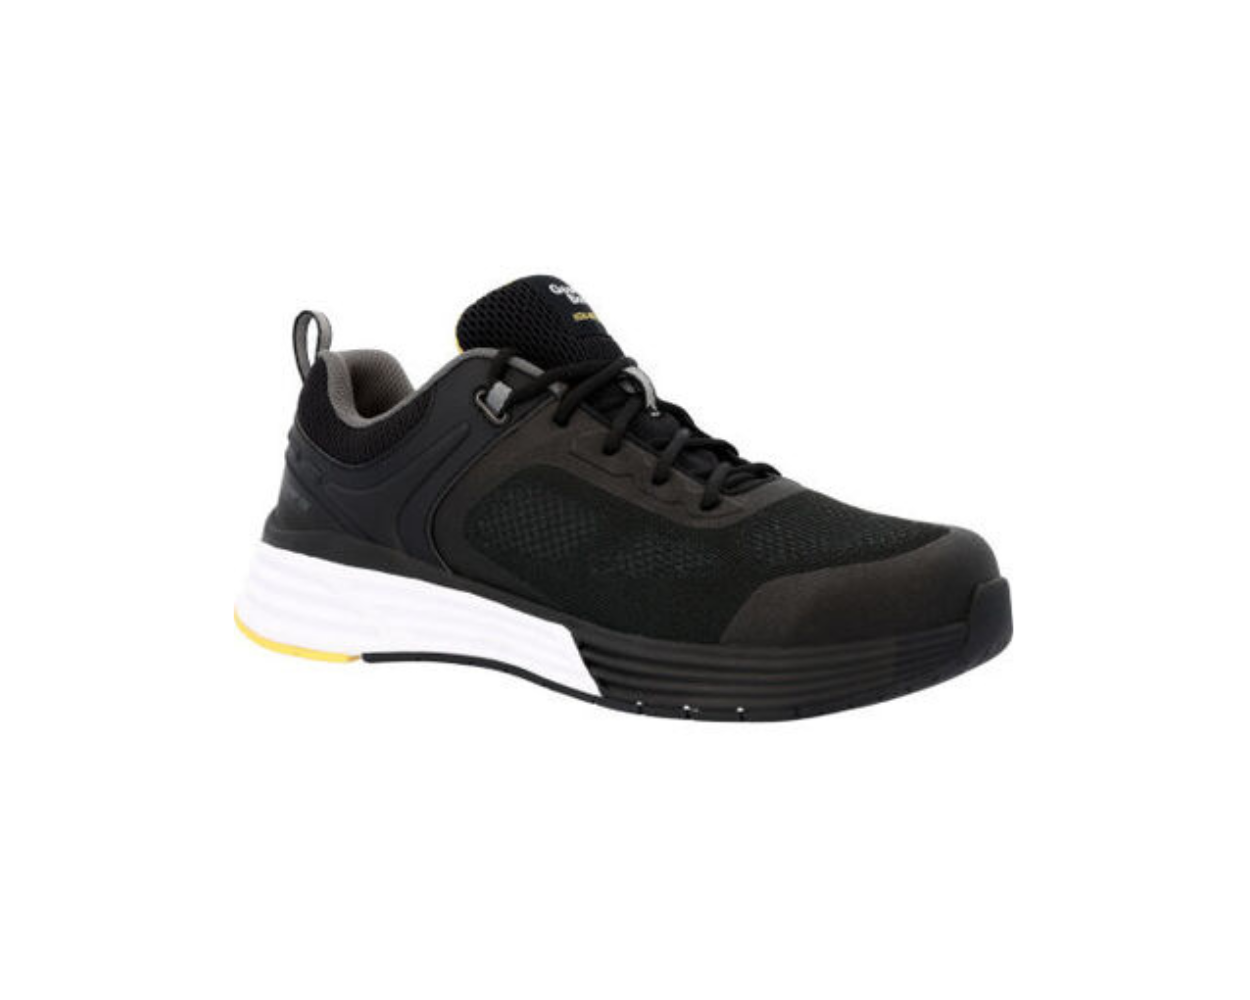 GEORGIA GB00541 DURABLEND SPORT COMPOSITE TOE ATHLETIC WORK SHOE, BLACK AND  YELLOW